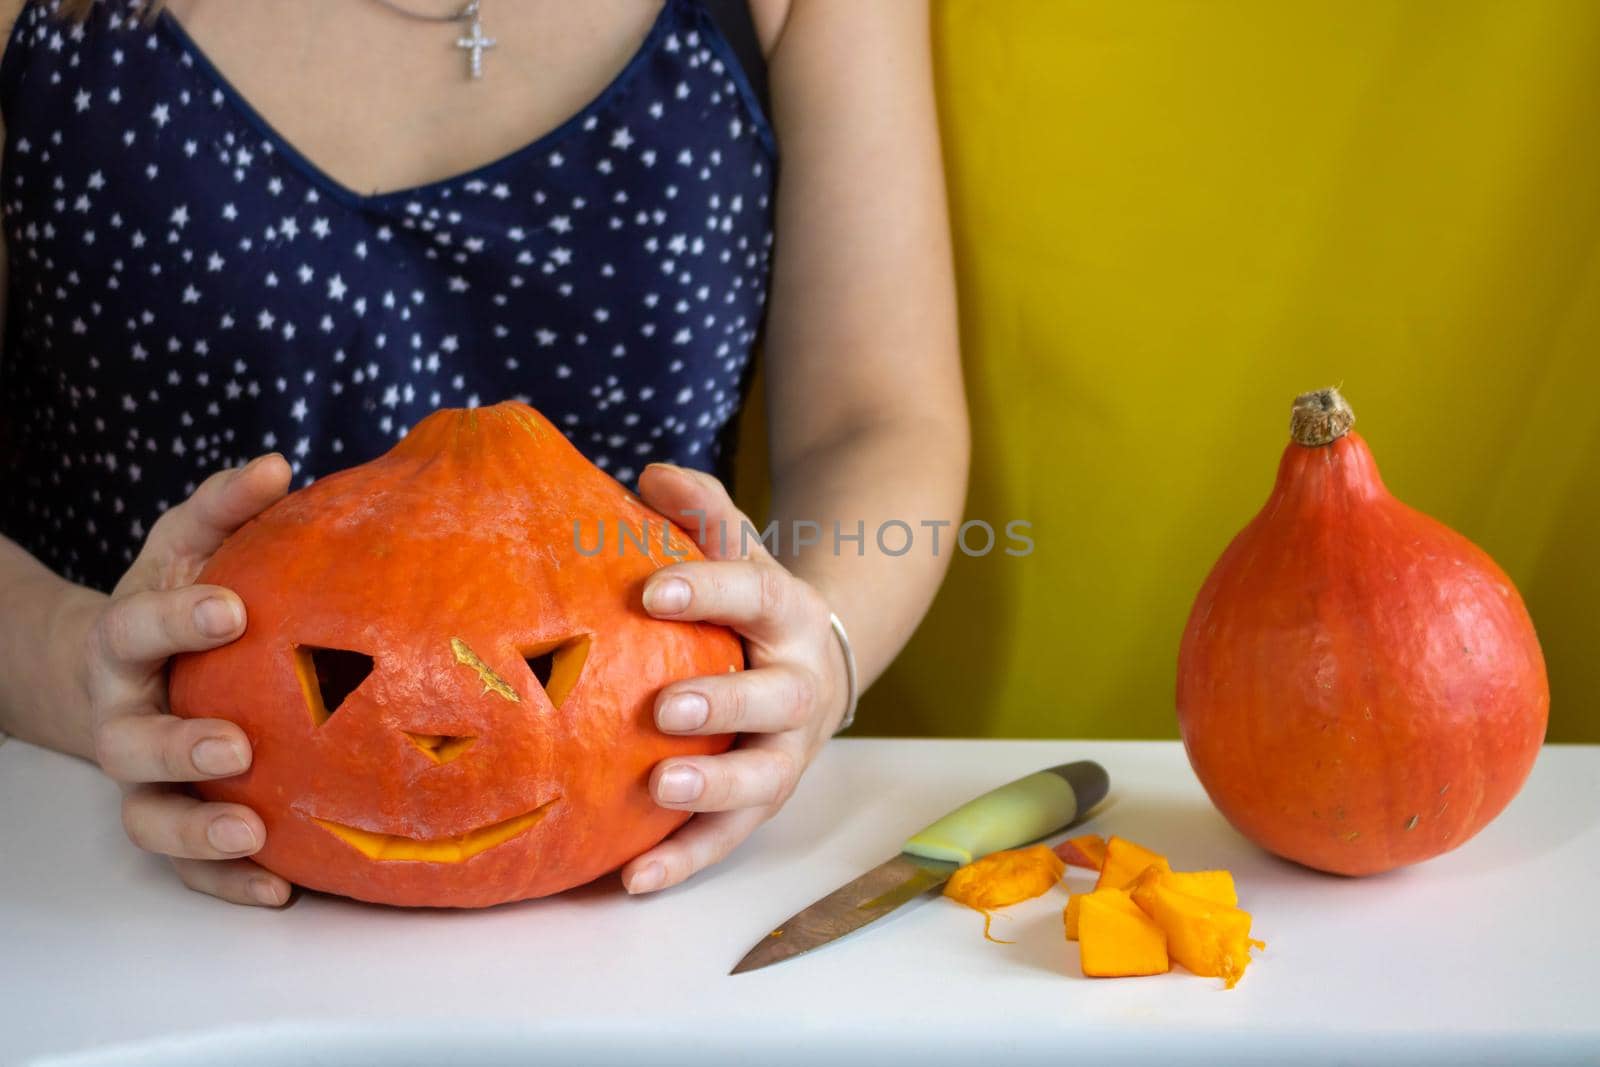 The concept of Halloween, decorations and holidays. Women's hands hold a pumpkin.